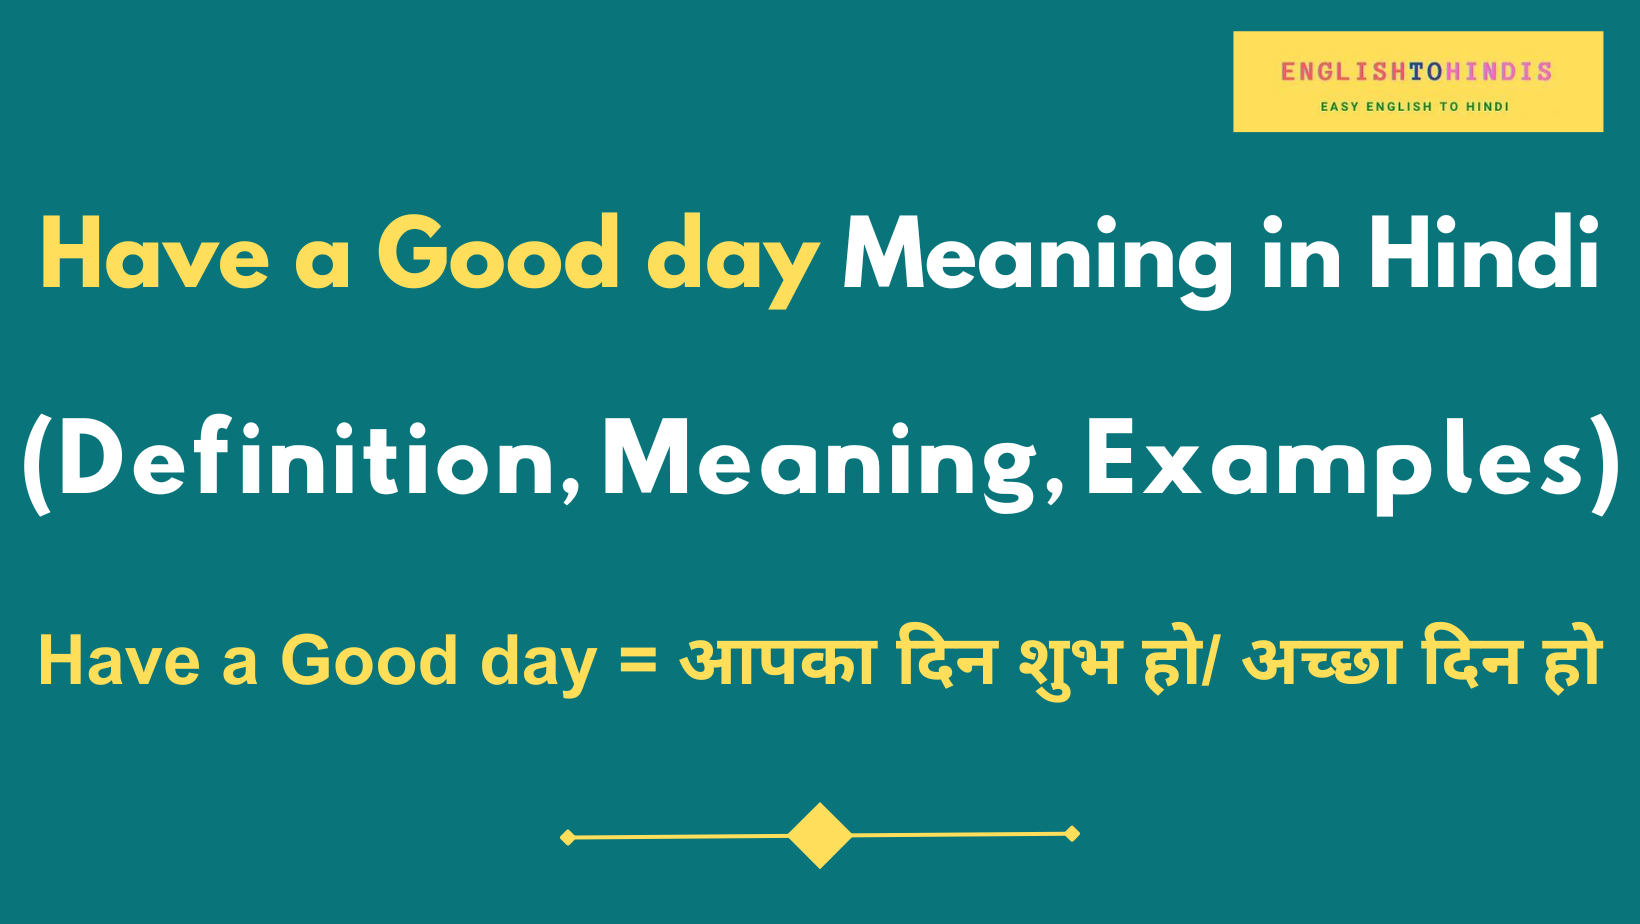 Have a Good day Meaning in Hindi